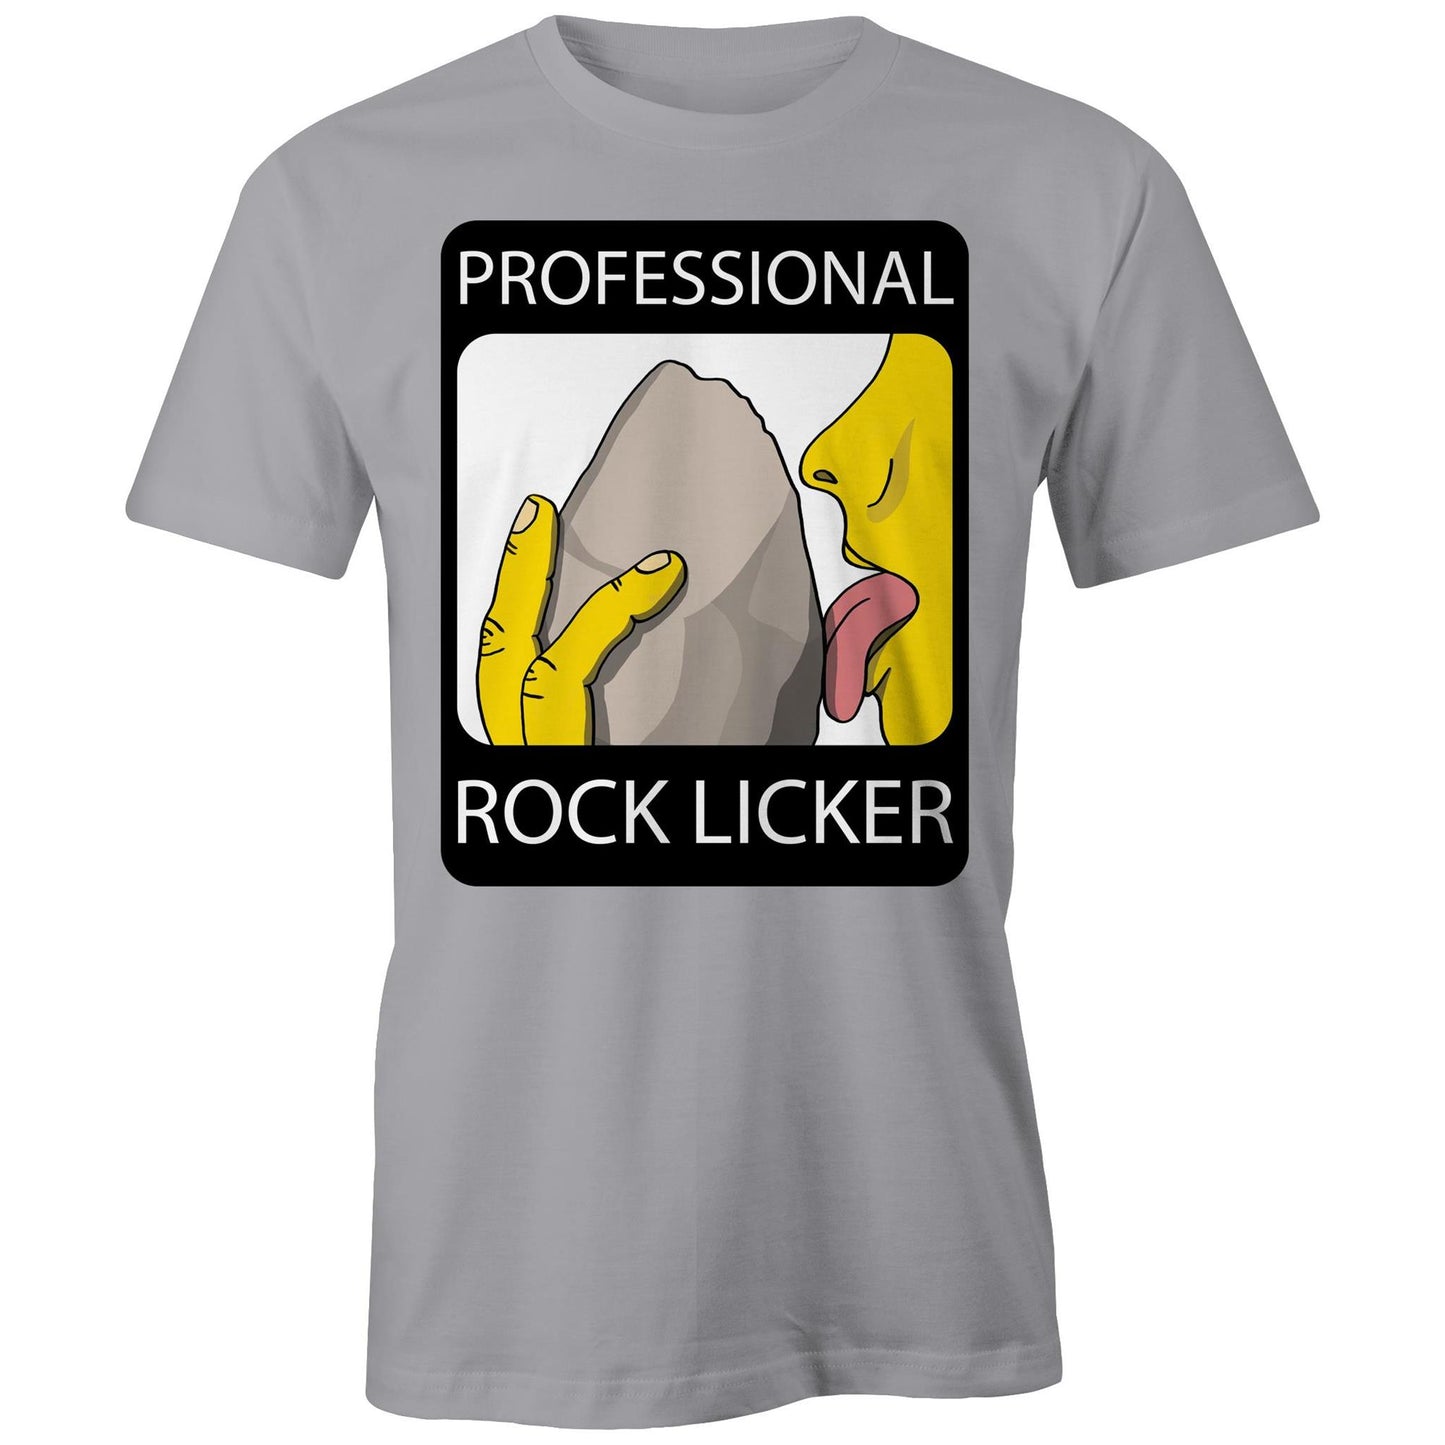 Professional Rock Licker (AS Colour - Classic Tee)